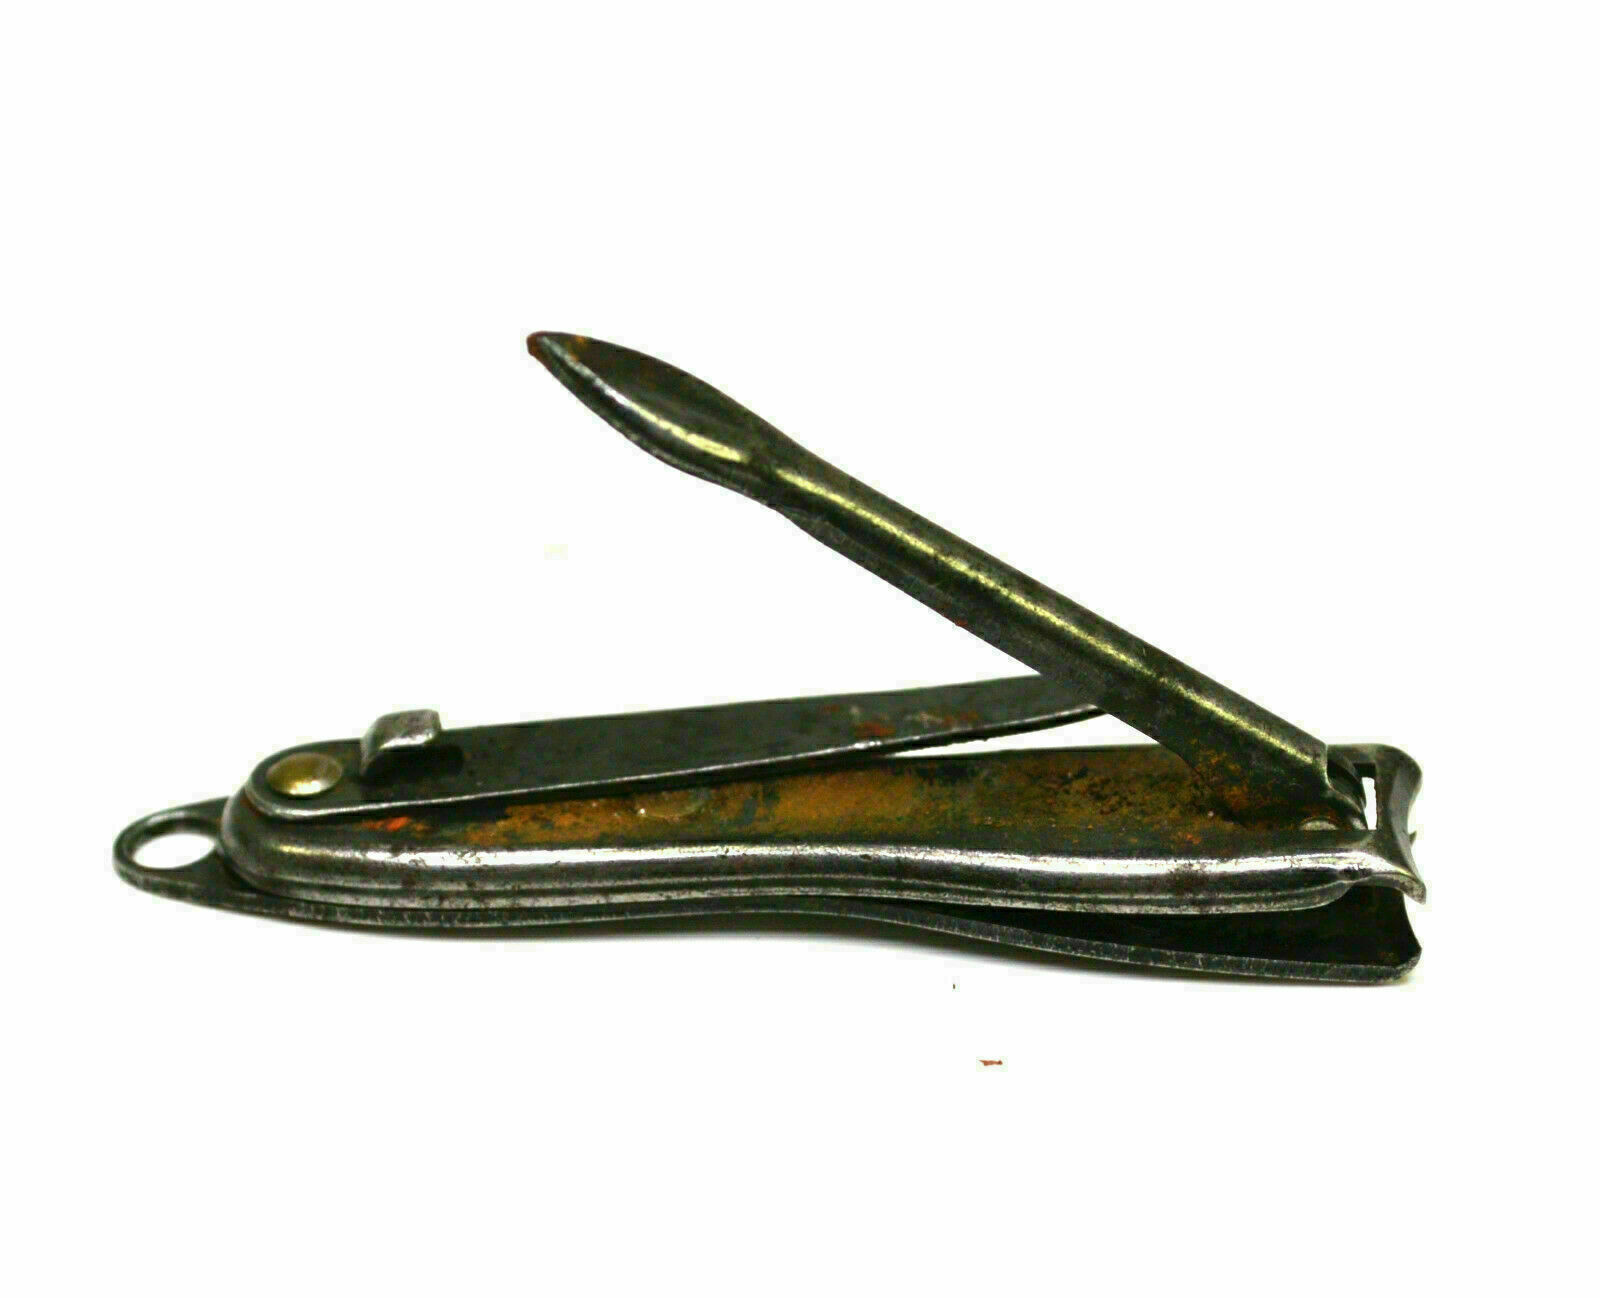 Antique Steel Nail Clippers Gem Jr. H.c. Cook Co. Ansonia, Ct, Usa 1920s